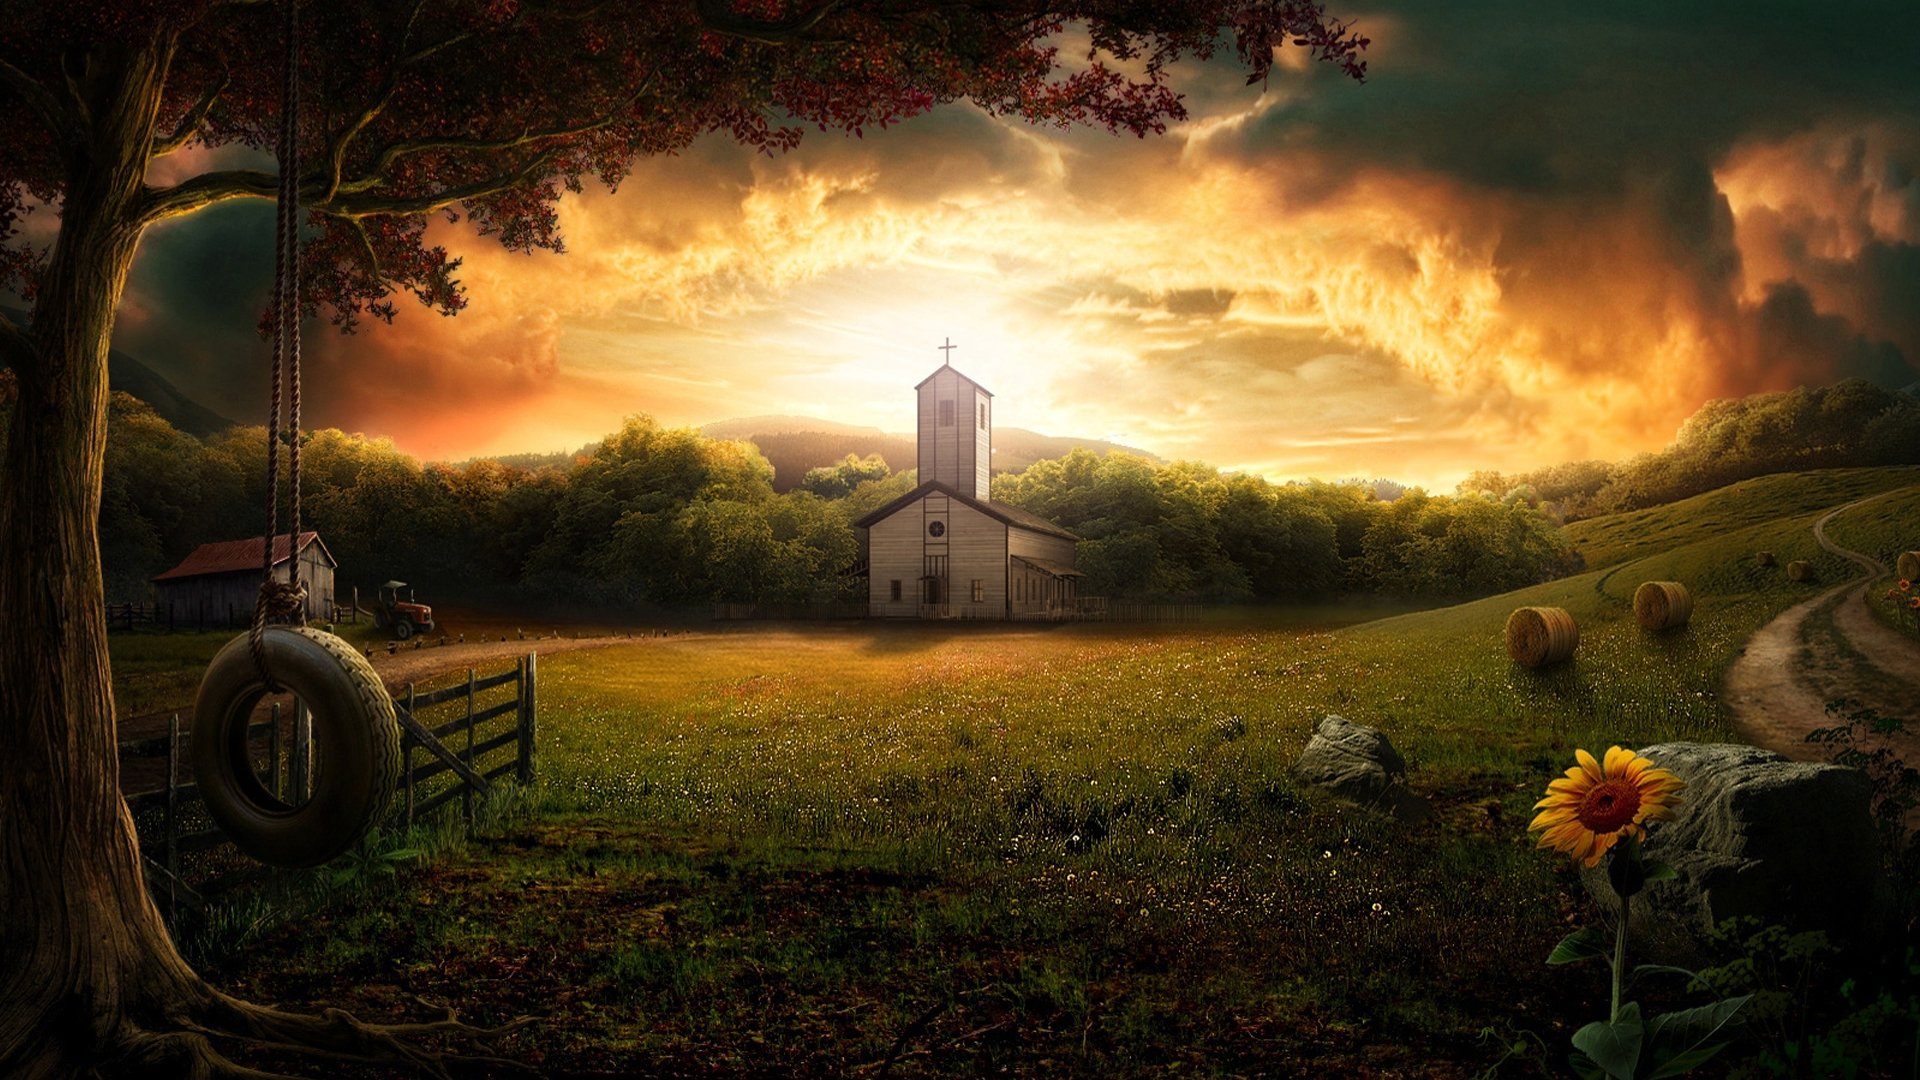 sunset, Clouds, Landscapes, Nature, Flowers, Churches, Sunflowers Wallpaper